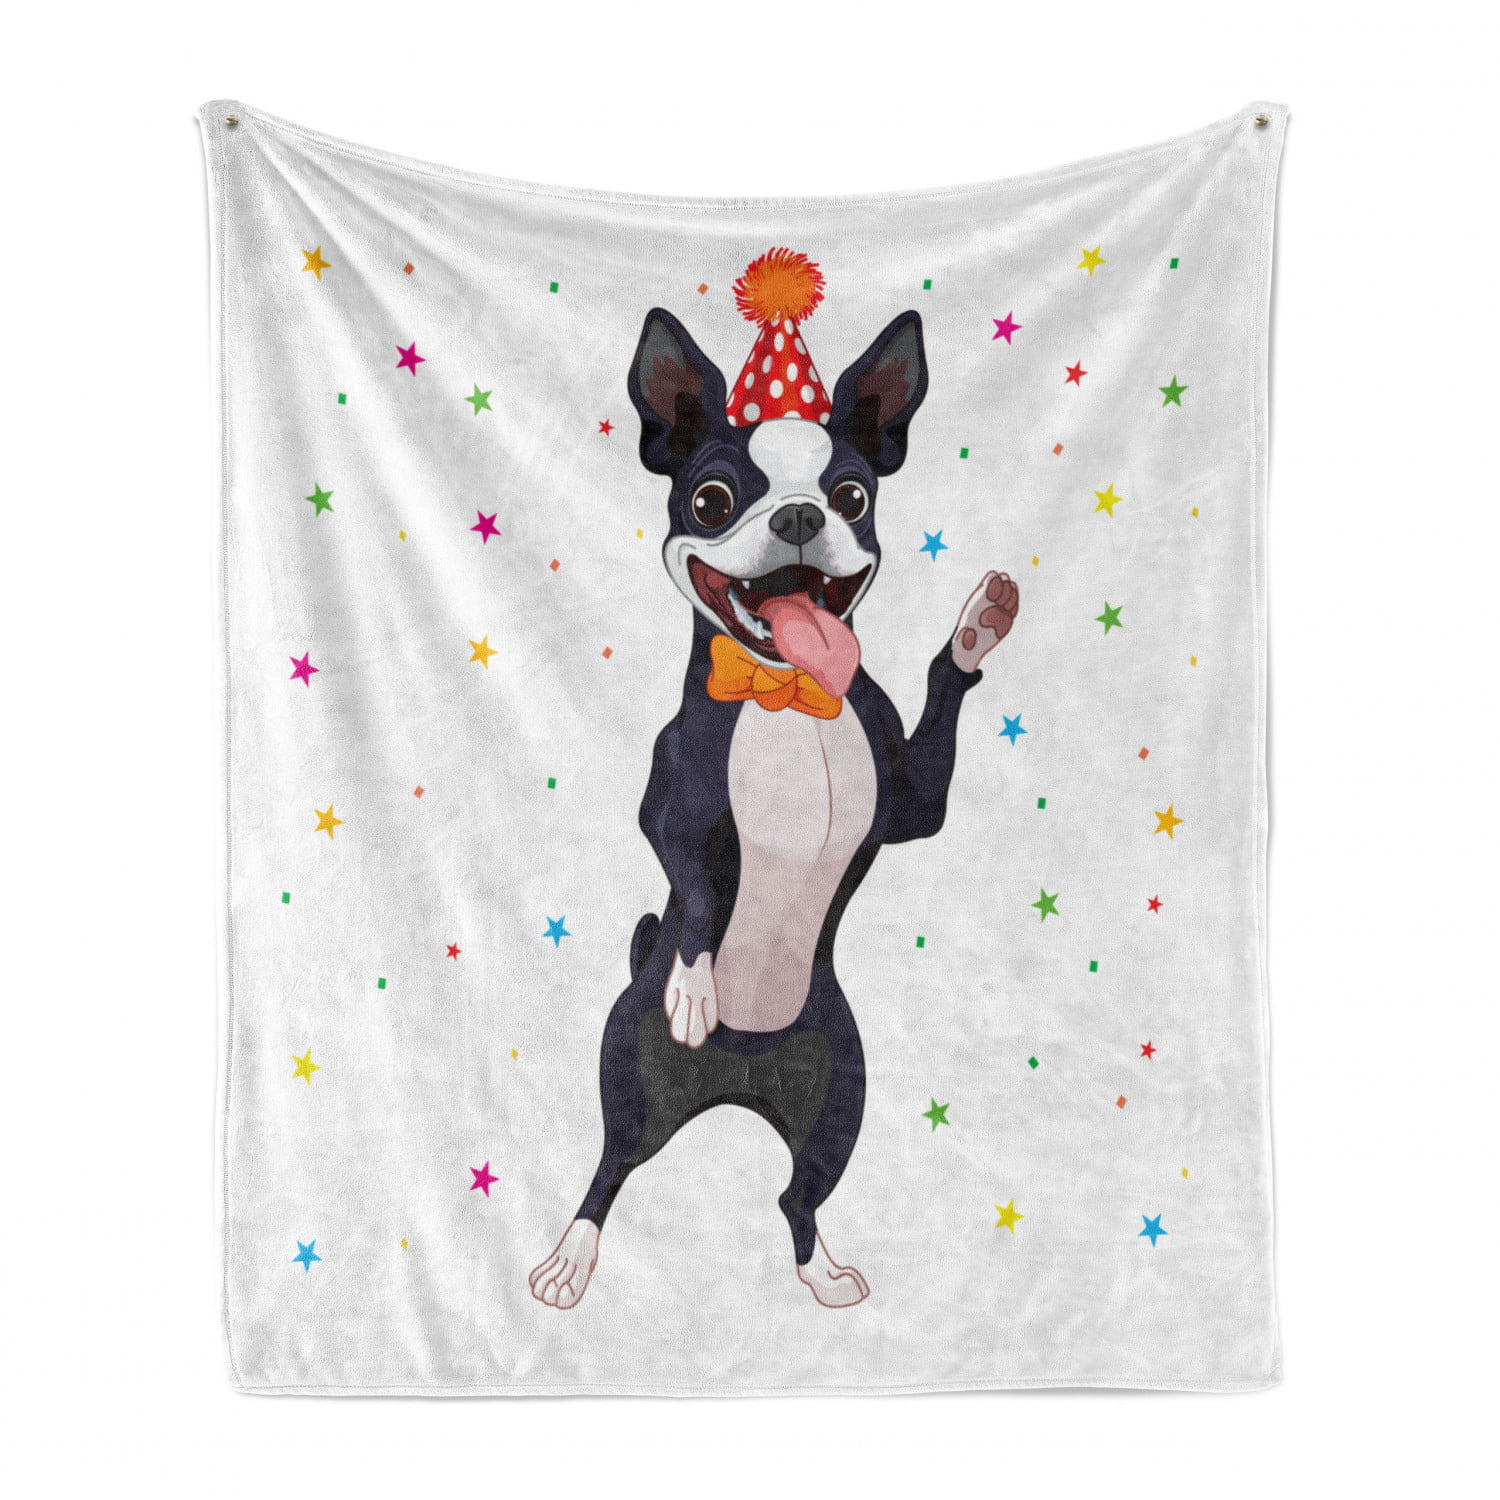 Multicolor Party Backdrop Colorful Dots Spots and Carnival Swirls Ambesonne Mardi Gras Soft Flannel Fleece Throw Blanket Cozy Plush for Indoor and Outdoor Use 60 x 80 